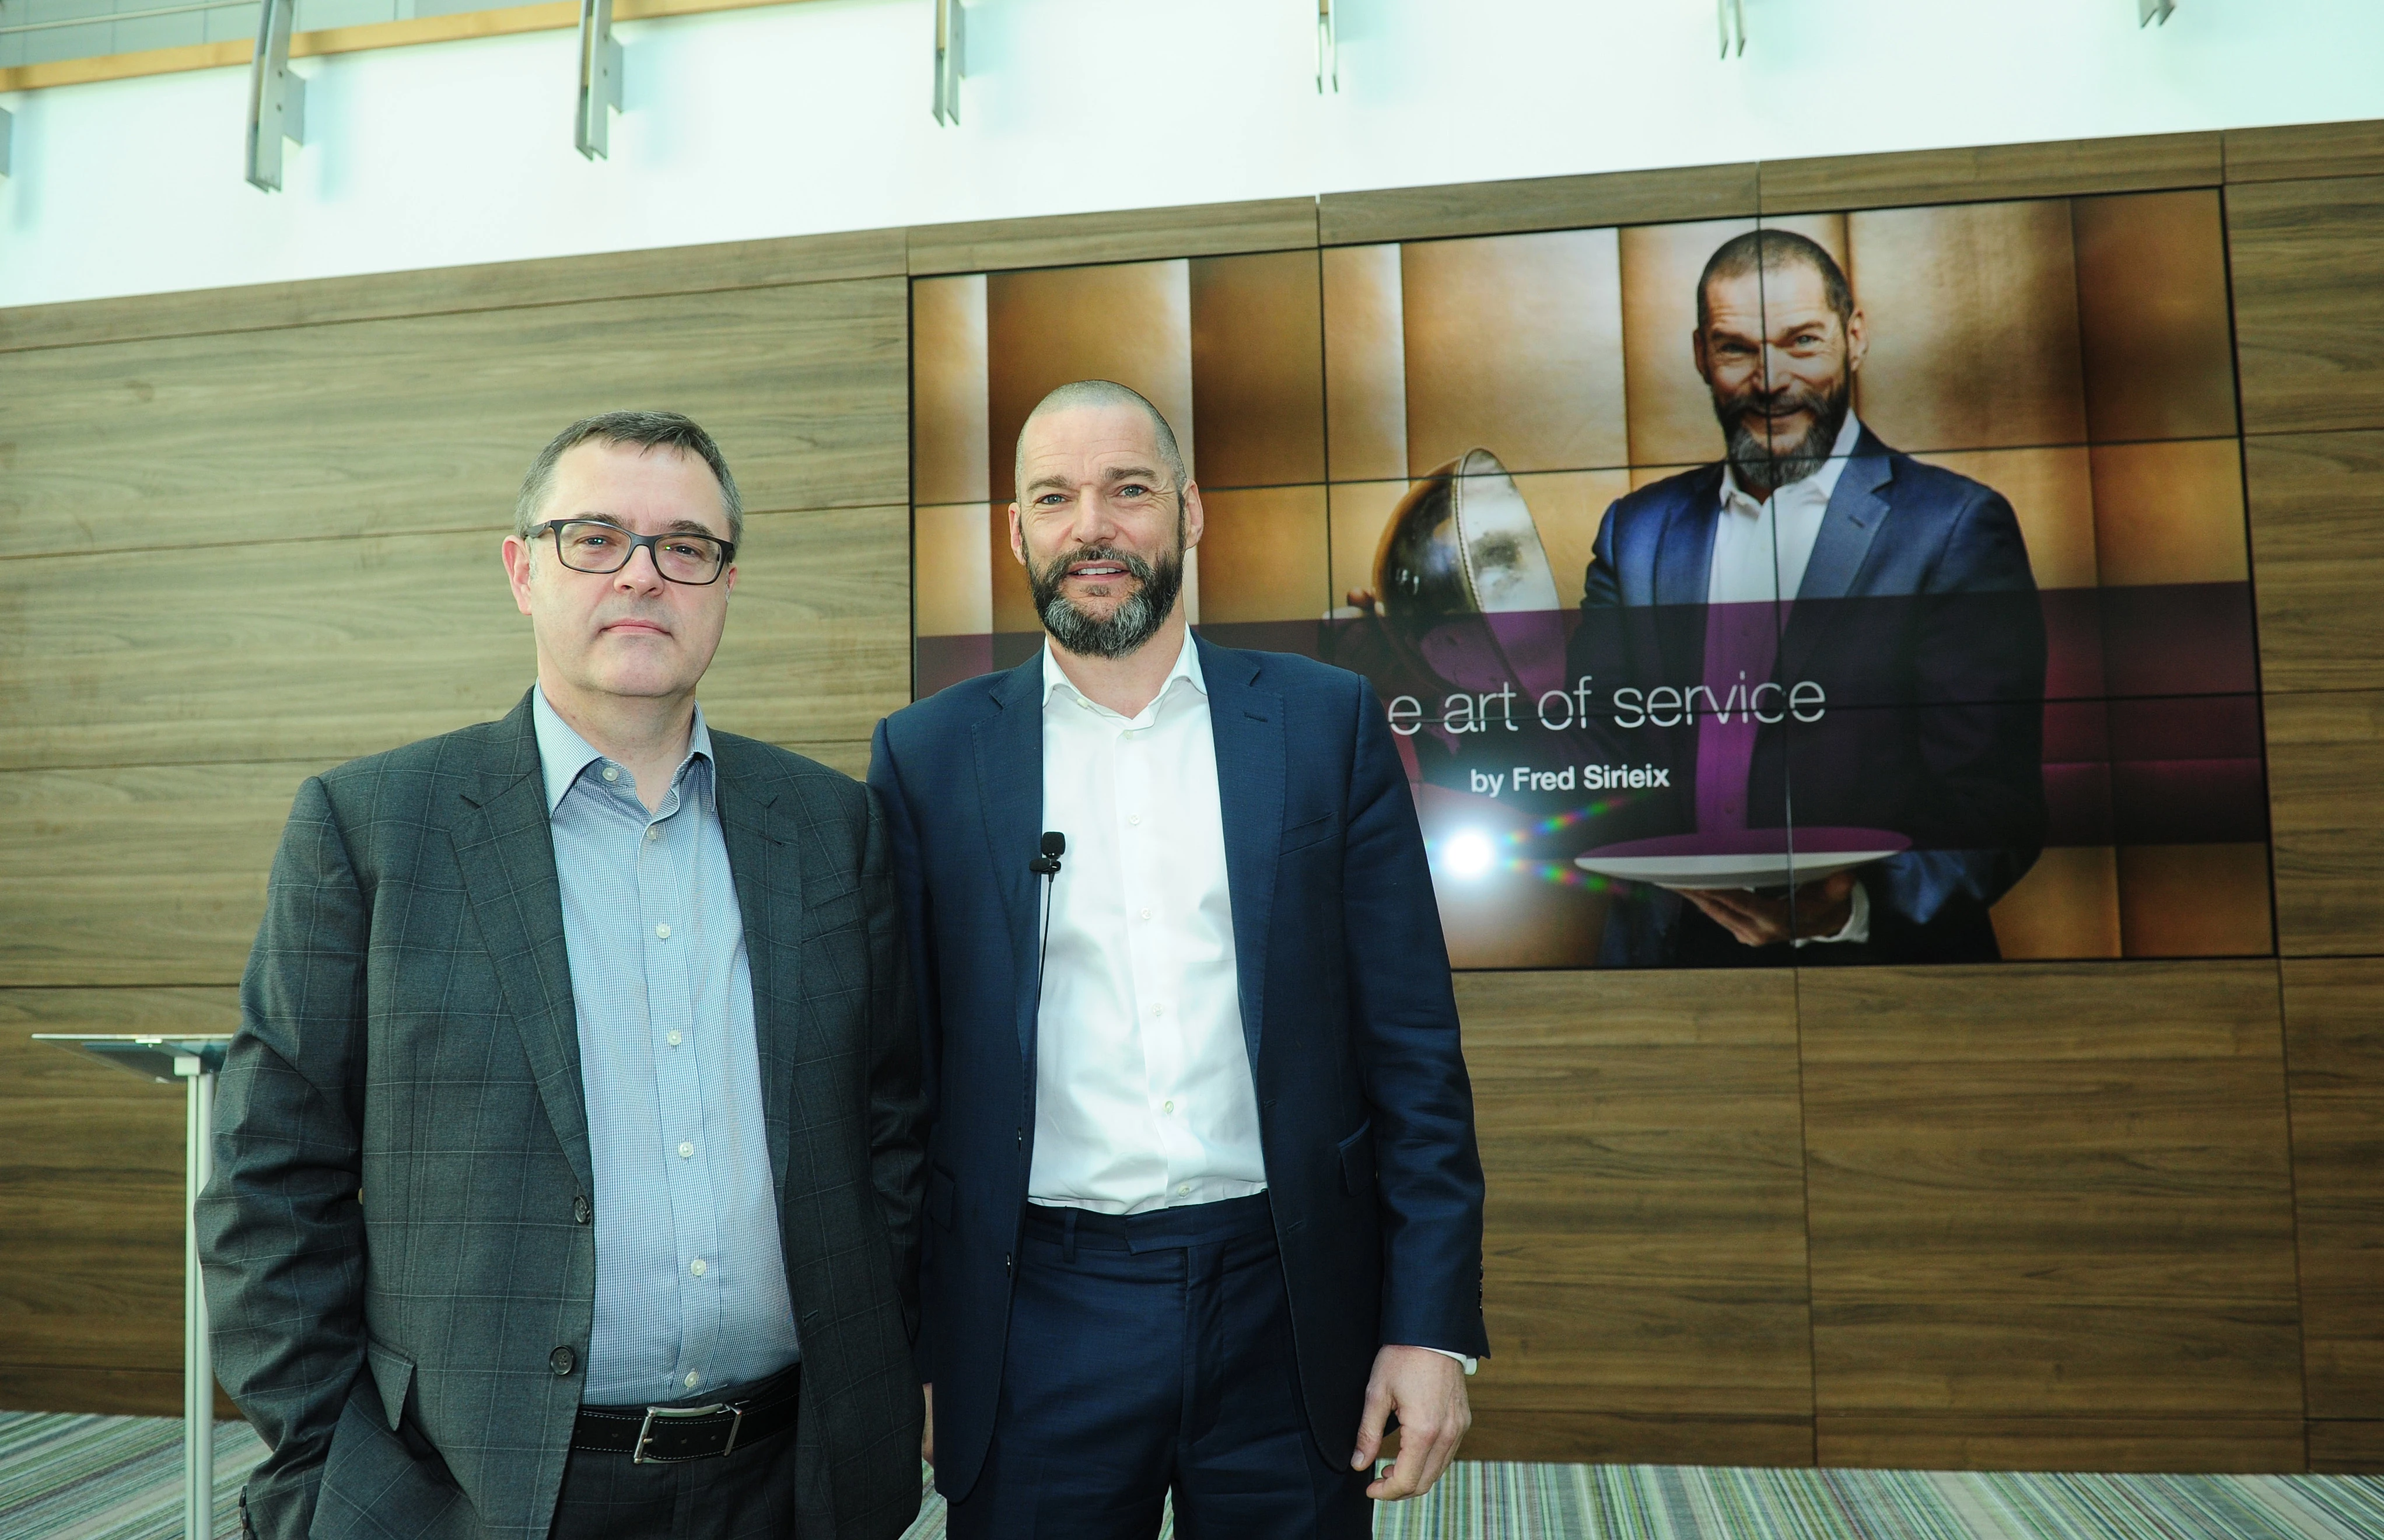 Paul Hunt, managing partner at Higgs & Sons, and Fred Sirieix